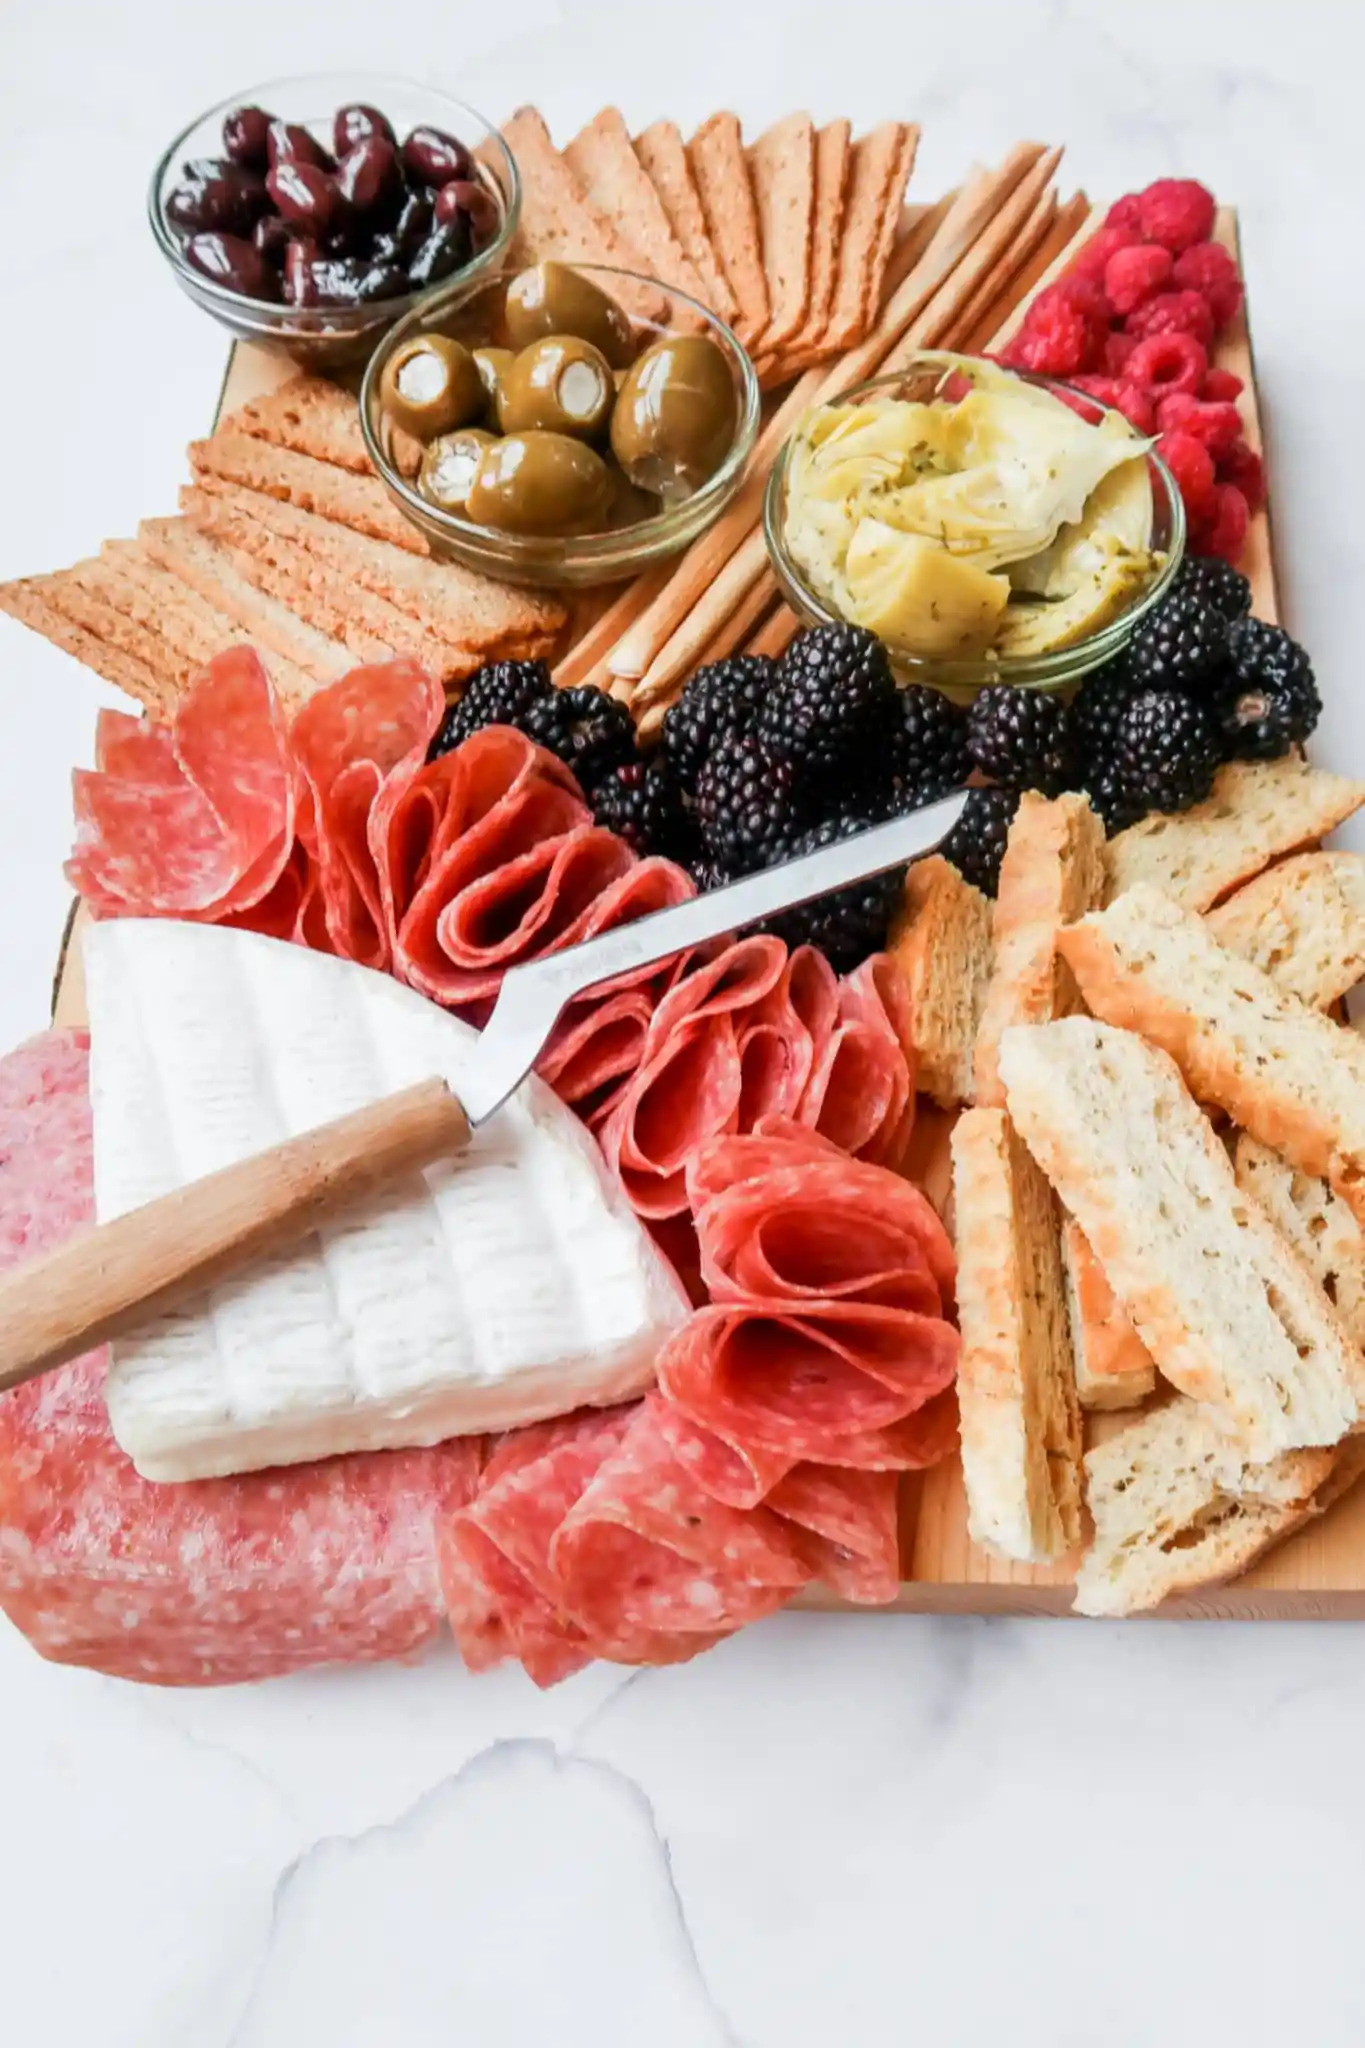 https://www.winewithpaige.com/wp-content/uploads/2022/11/1-Epic-Charcuterie-Board-for-Two.webp